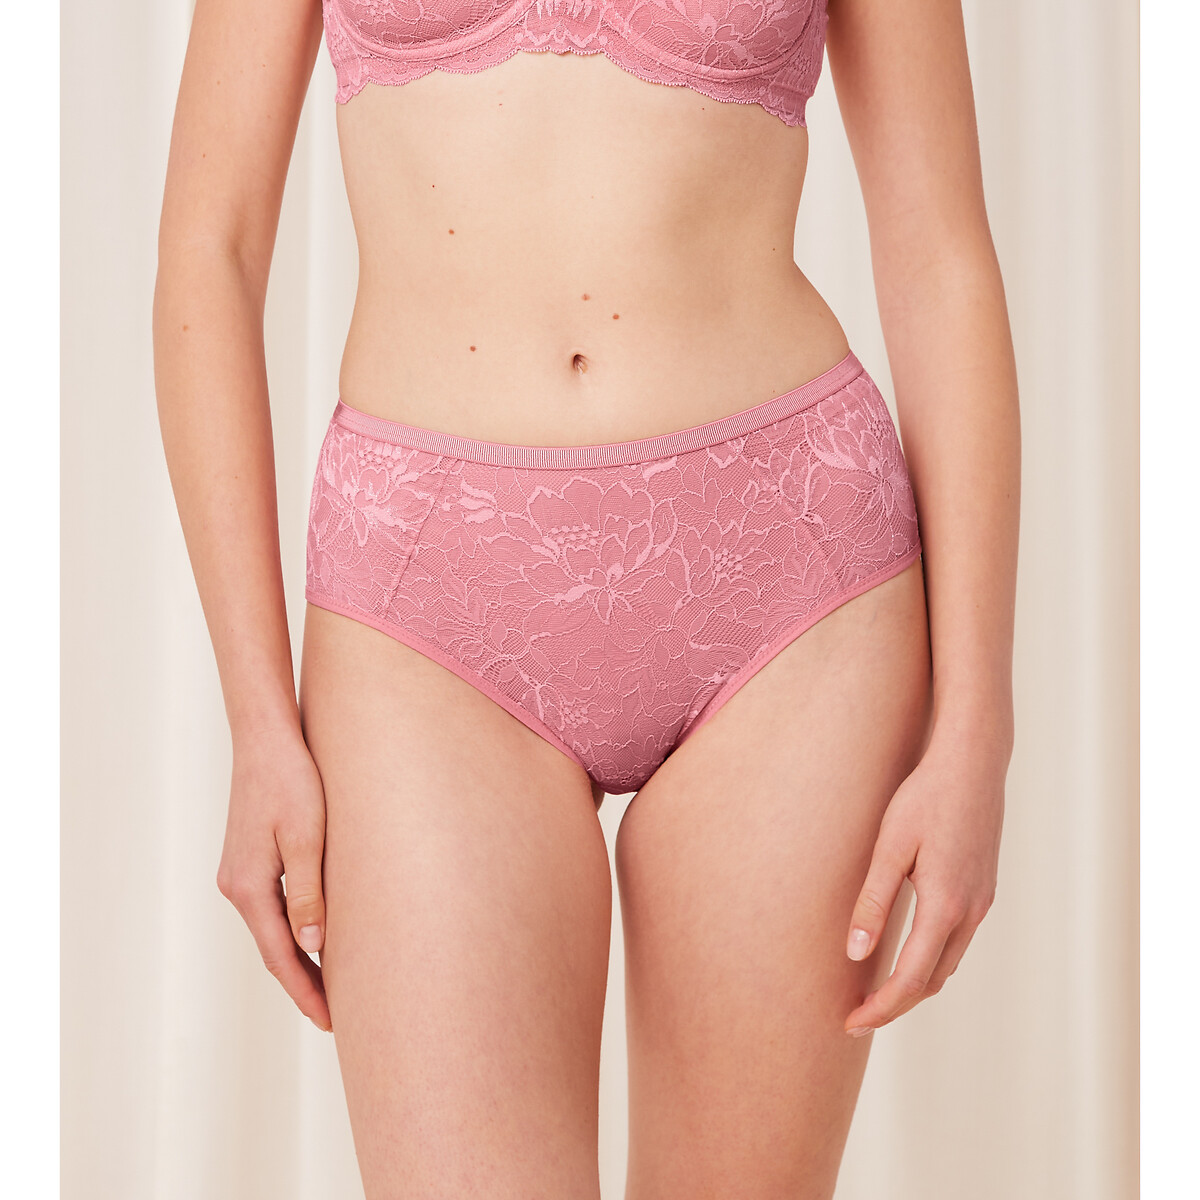 Amourette Charm Full Knickers